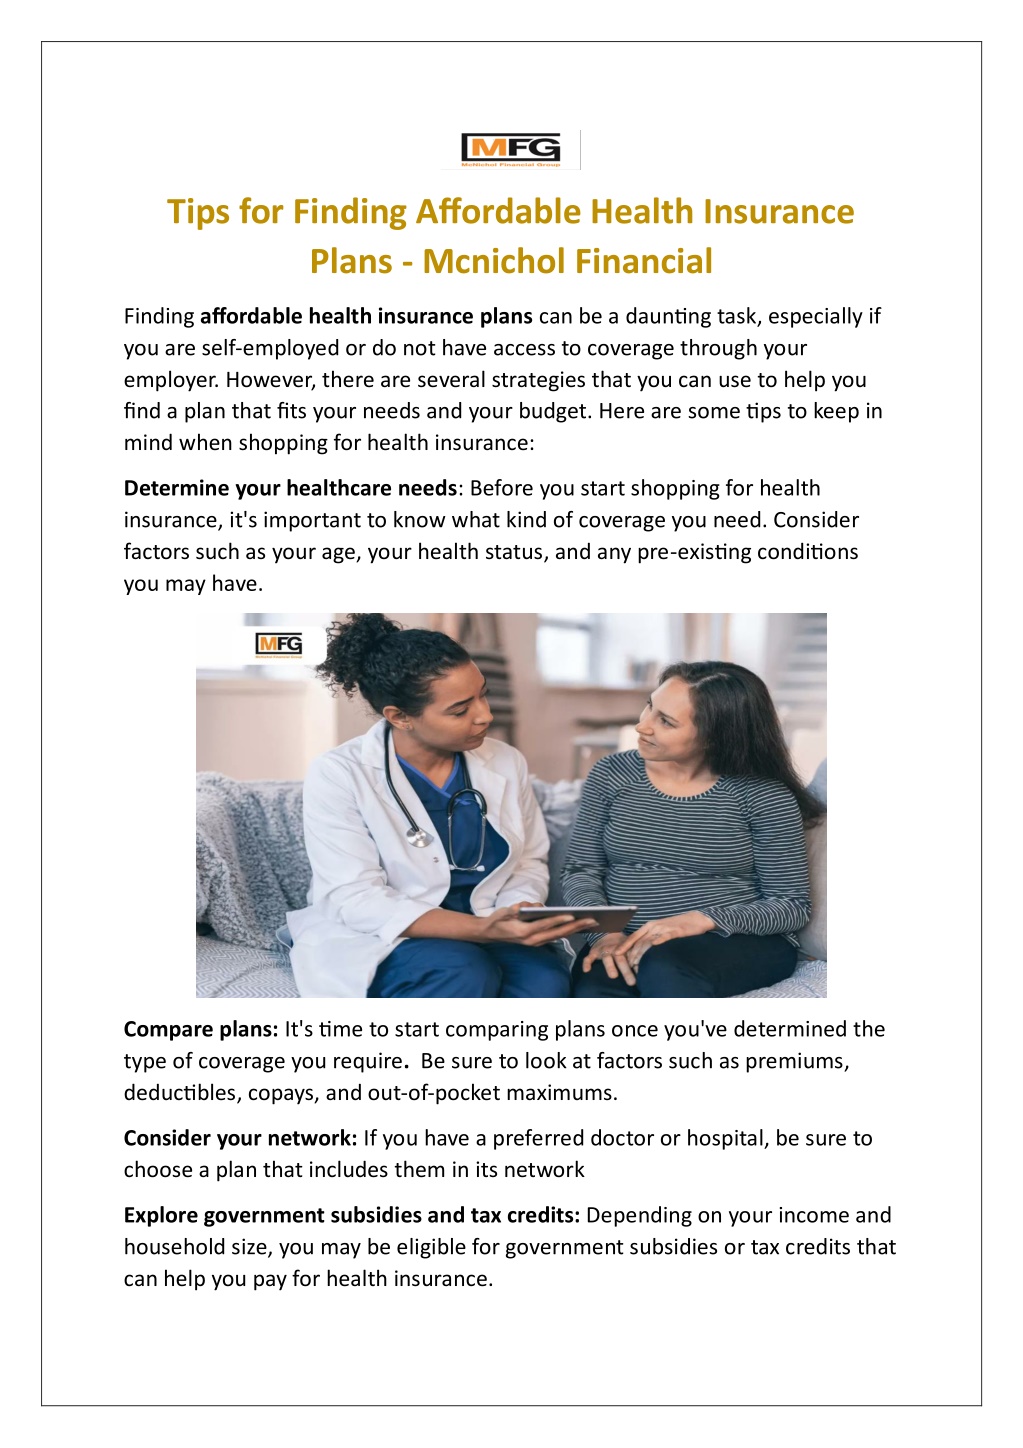 Ppt Mcnichol Financial Group The Best Way To Find Affordable Health Insurance Plan 